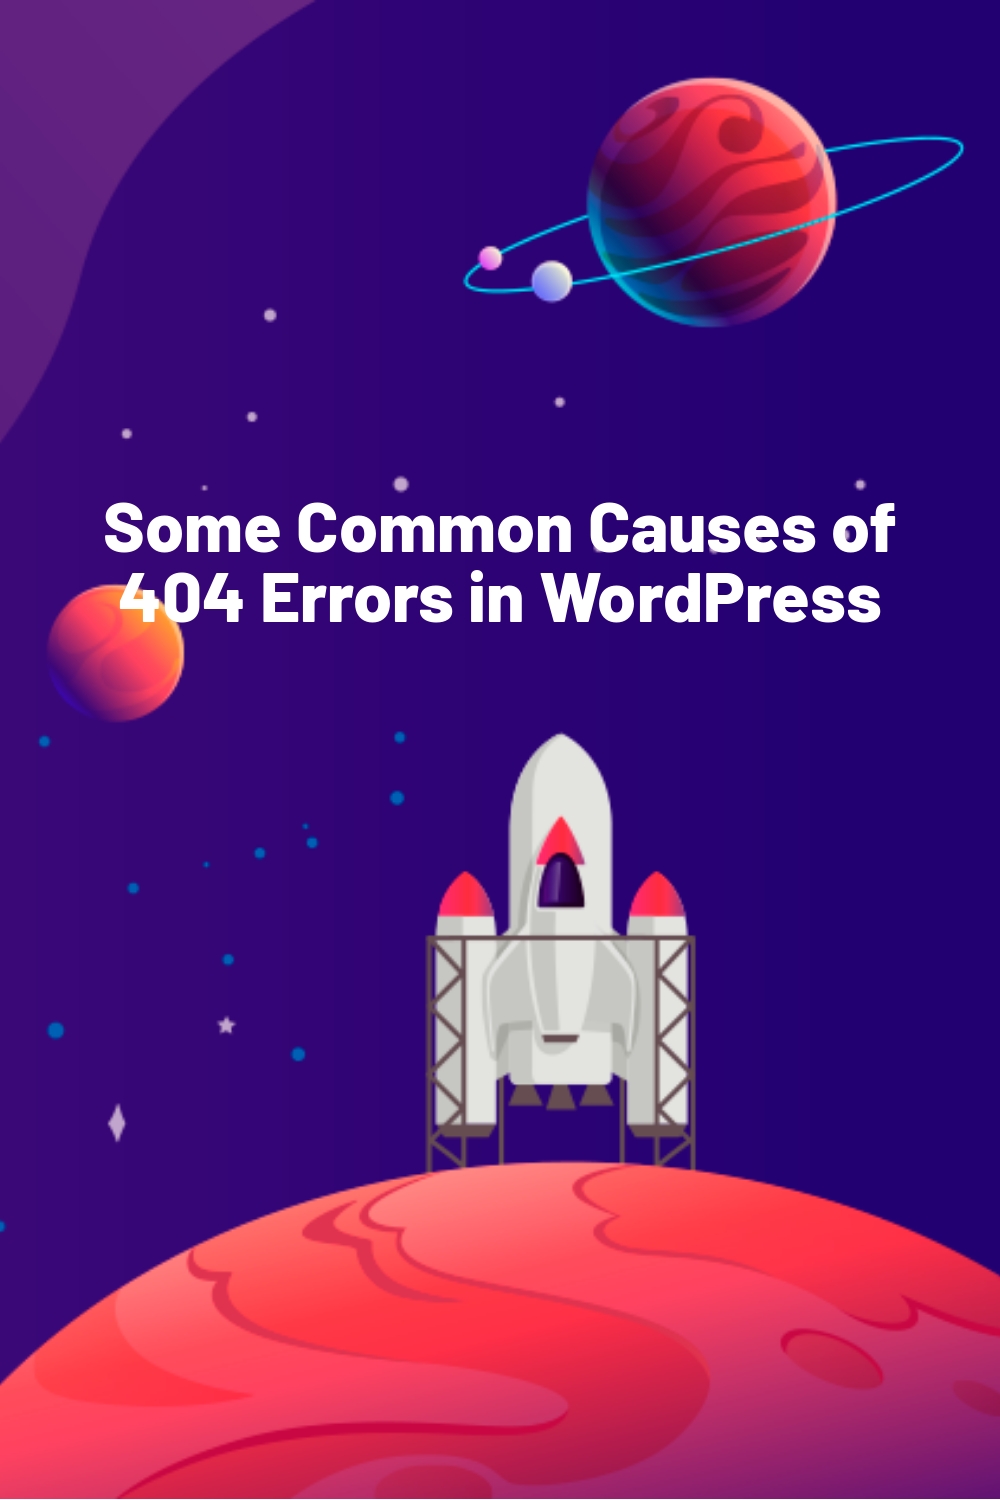 Some Common Causes of 404 Errors in WordPress